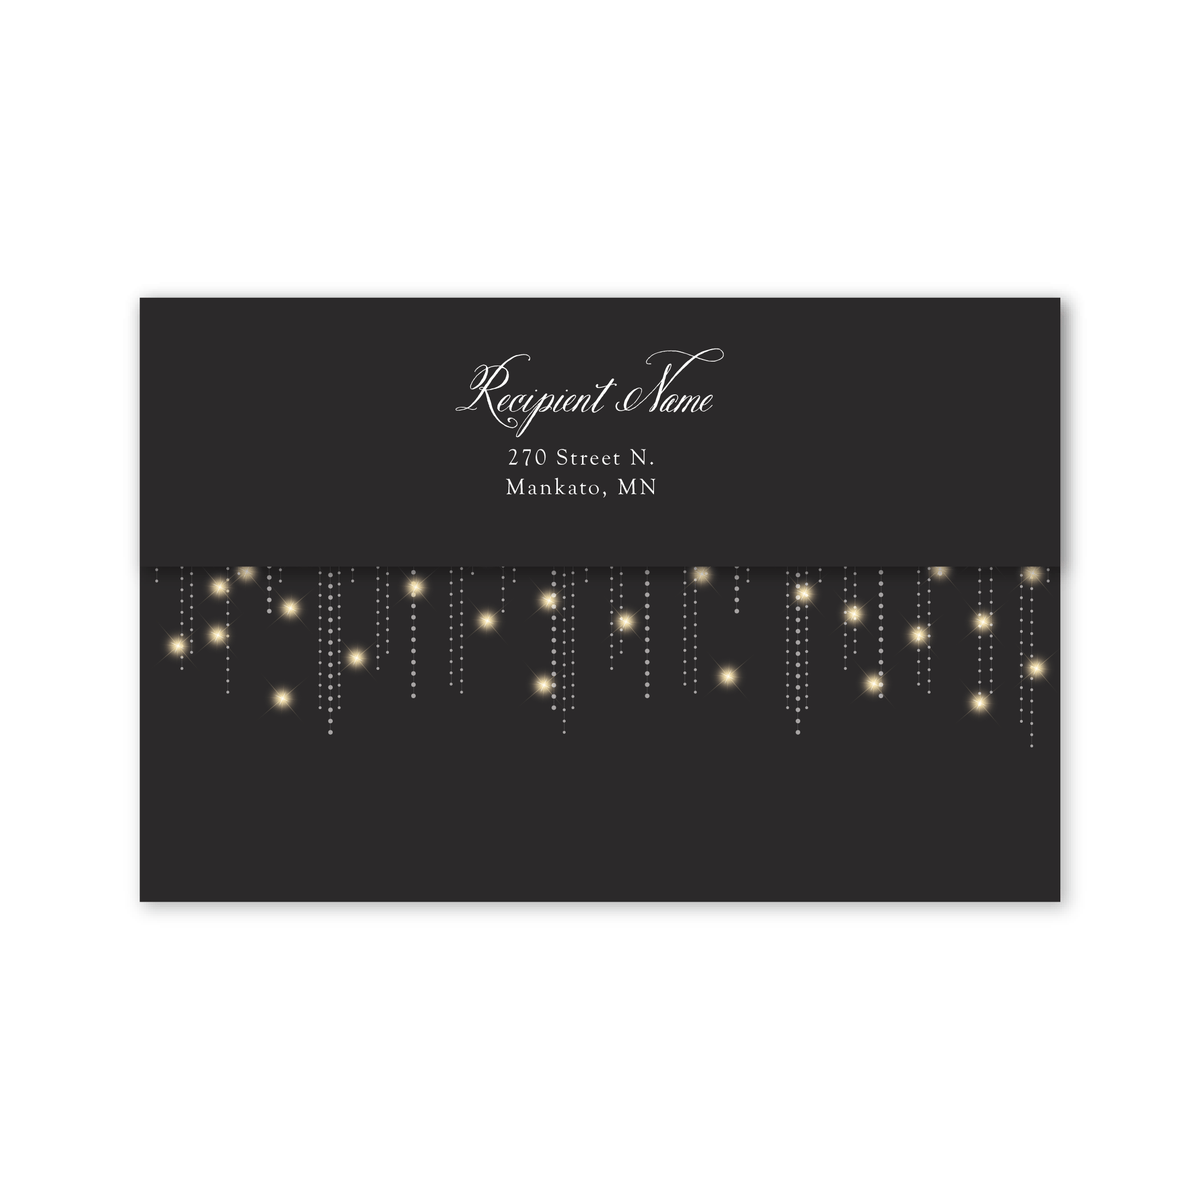 Glowing Strands All-in-One Wedding Invitation Gartner Studios All-in-One Wedding Invitation 98526